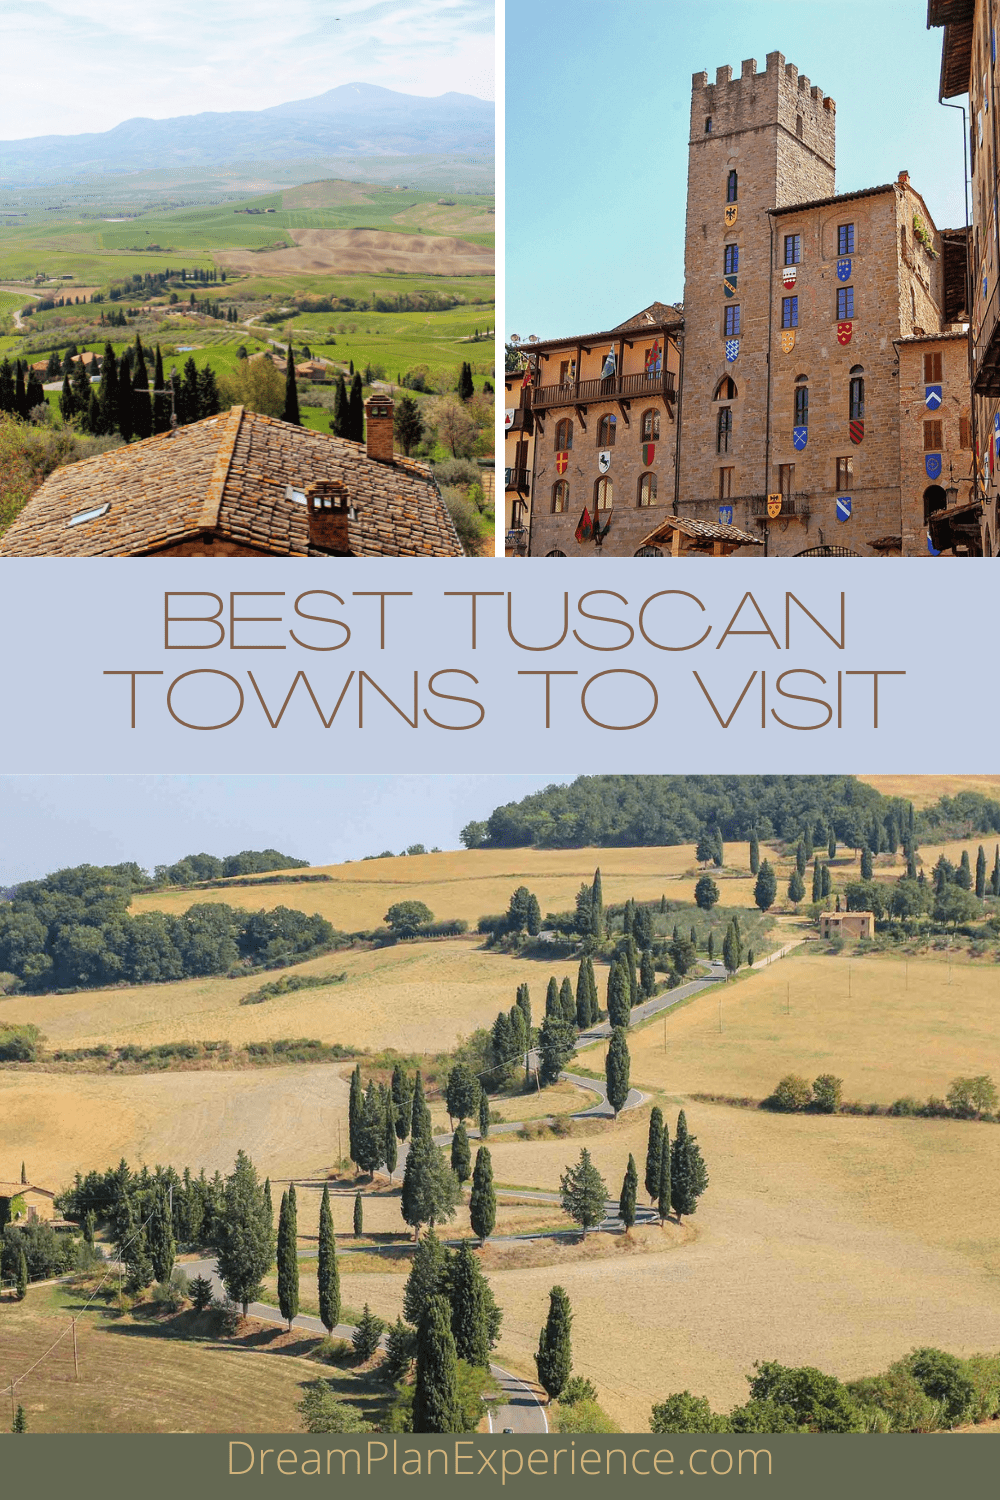 Some of the most beautiful places in Tuscany include the hilltop towns of Montalcino, Pienza, Montepulciano, Cortona, Arezzo and Siena.